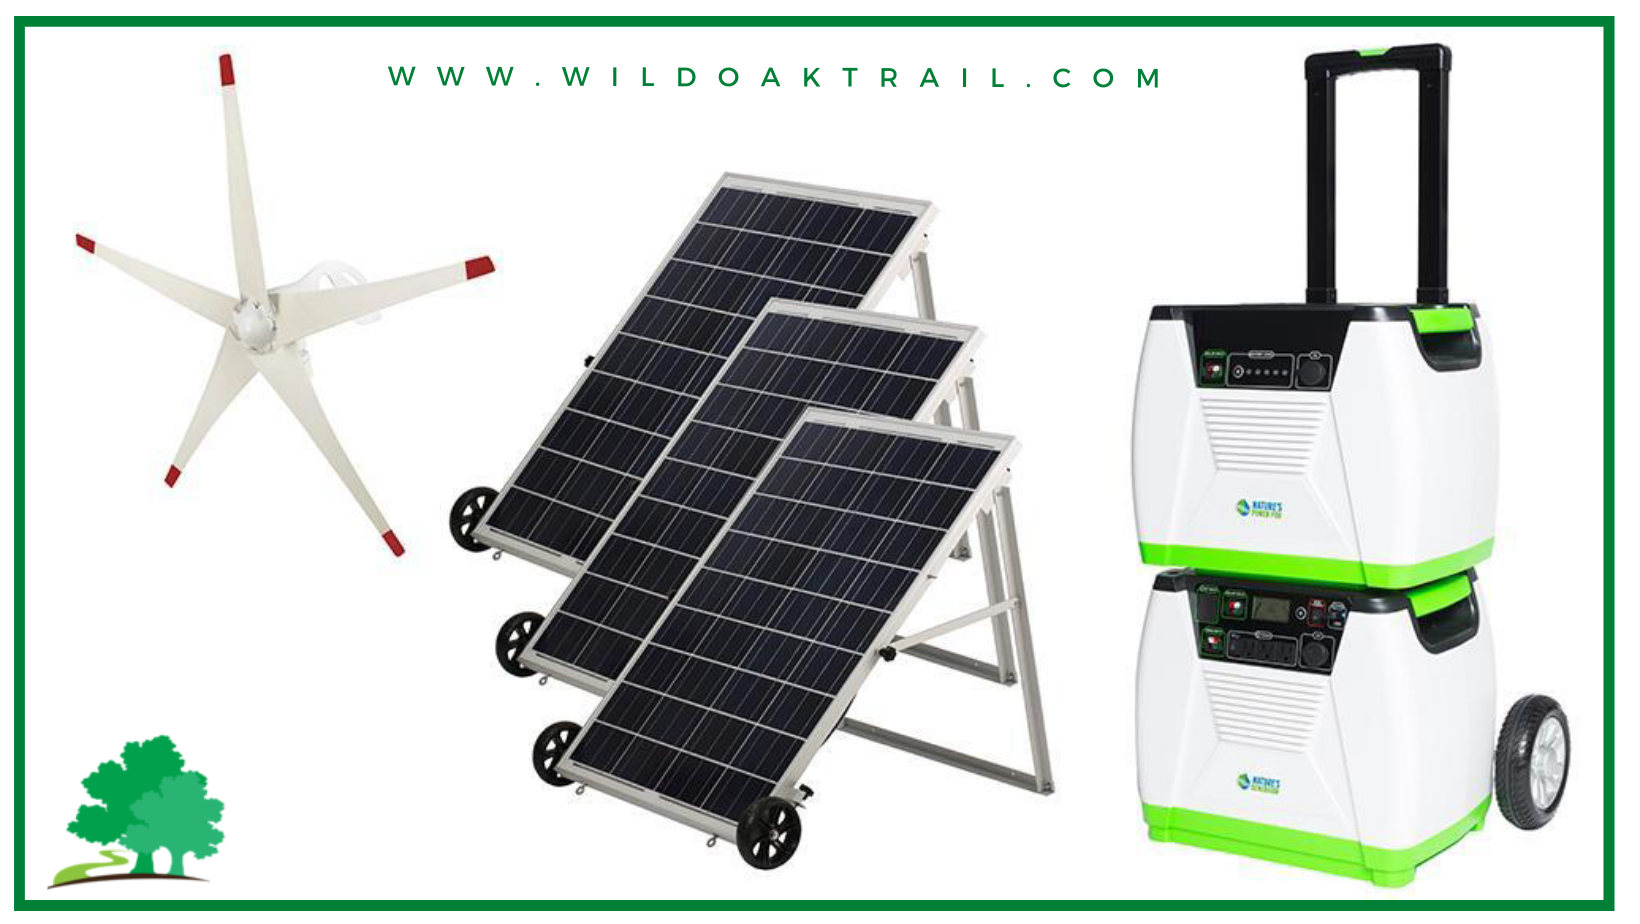 Two Nature's Generators on wheel carts with three solar panels and one wind turbine